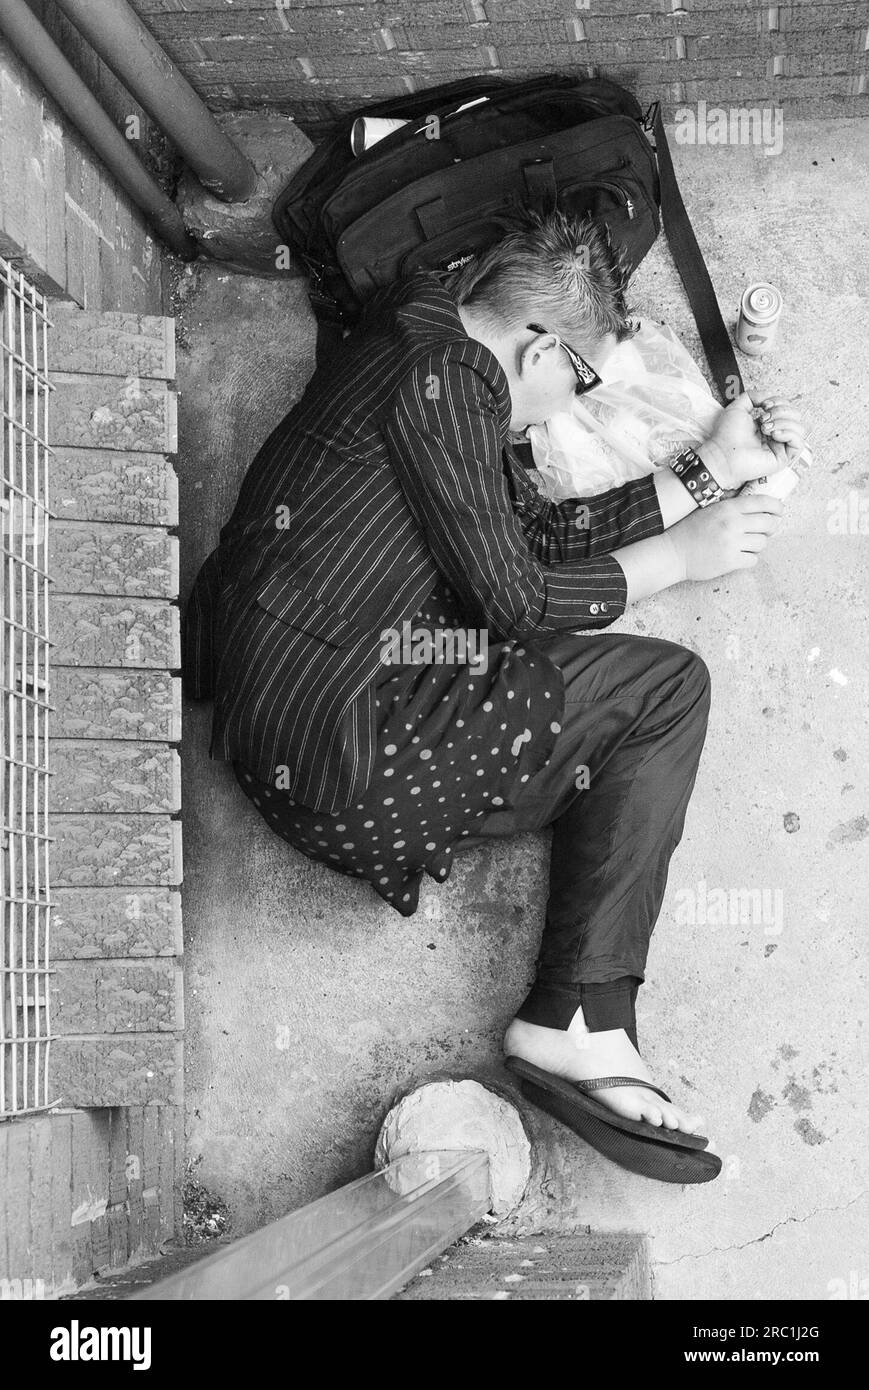 A homeless young man passed out on a sidewalk, surrounded by empty cans of lighter fluid, at Darlinghurst in East Sydney, Australia. The inhaling of lighter fluid fumes creates a low-cost 'high' that is favoured by some users of illicit drugs. Stock Photo